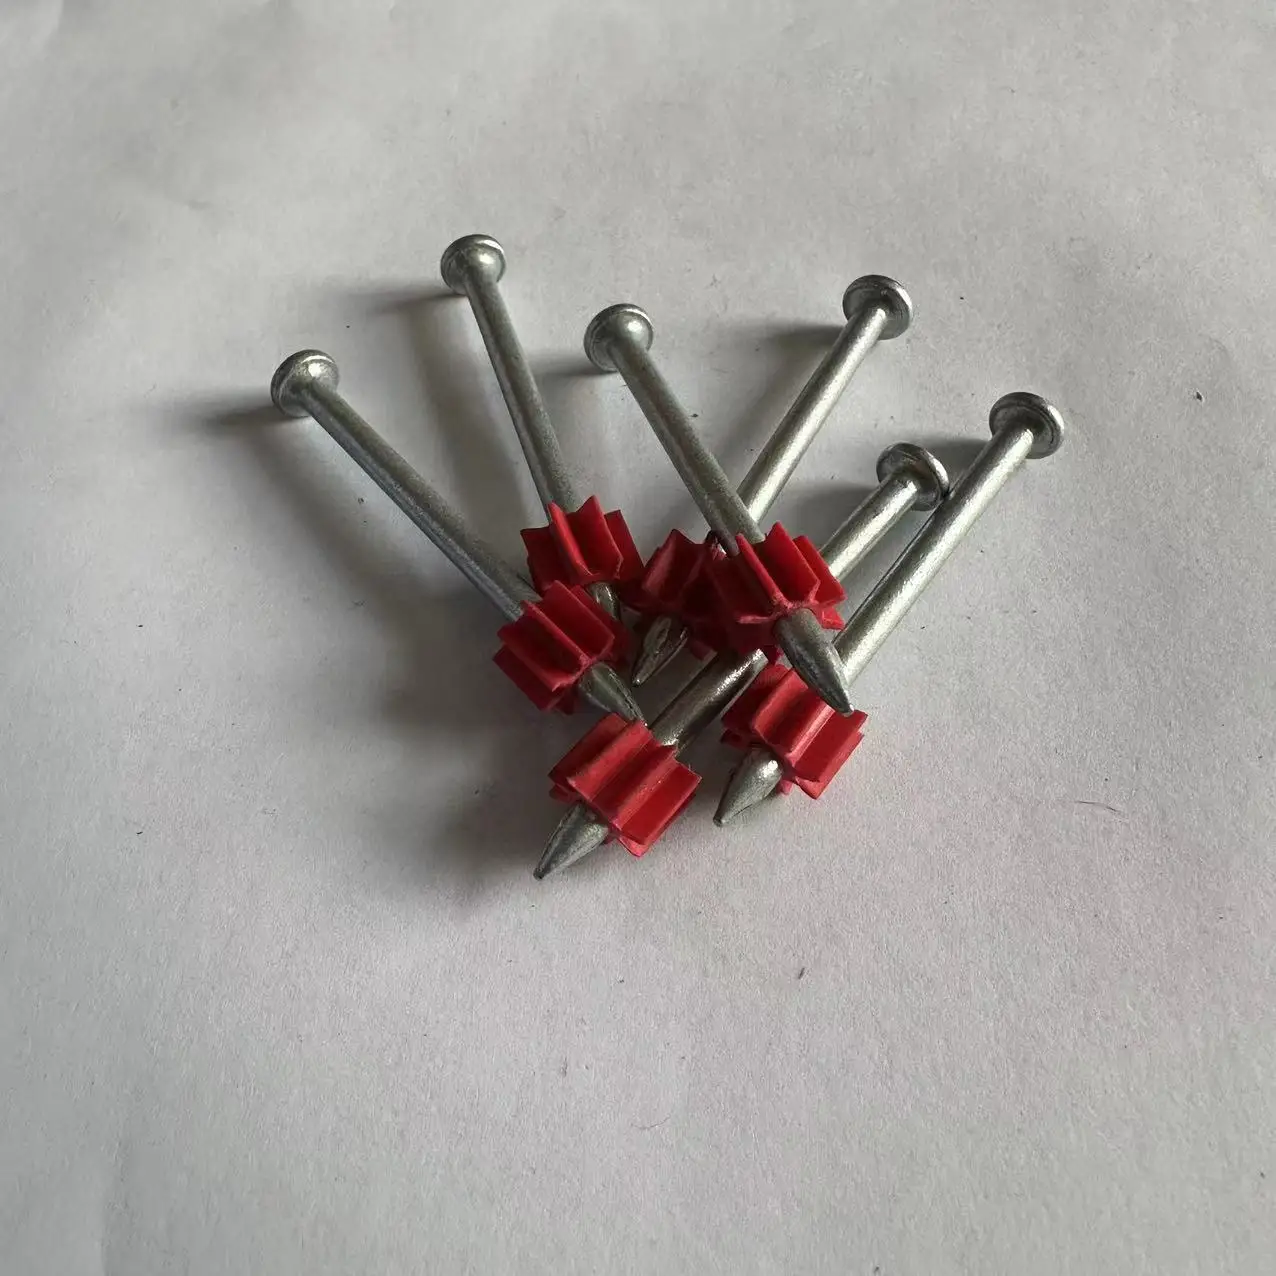 High quality power loads red hit drive pin steel washer pin shoot concrete nails